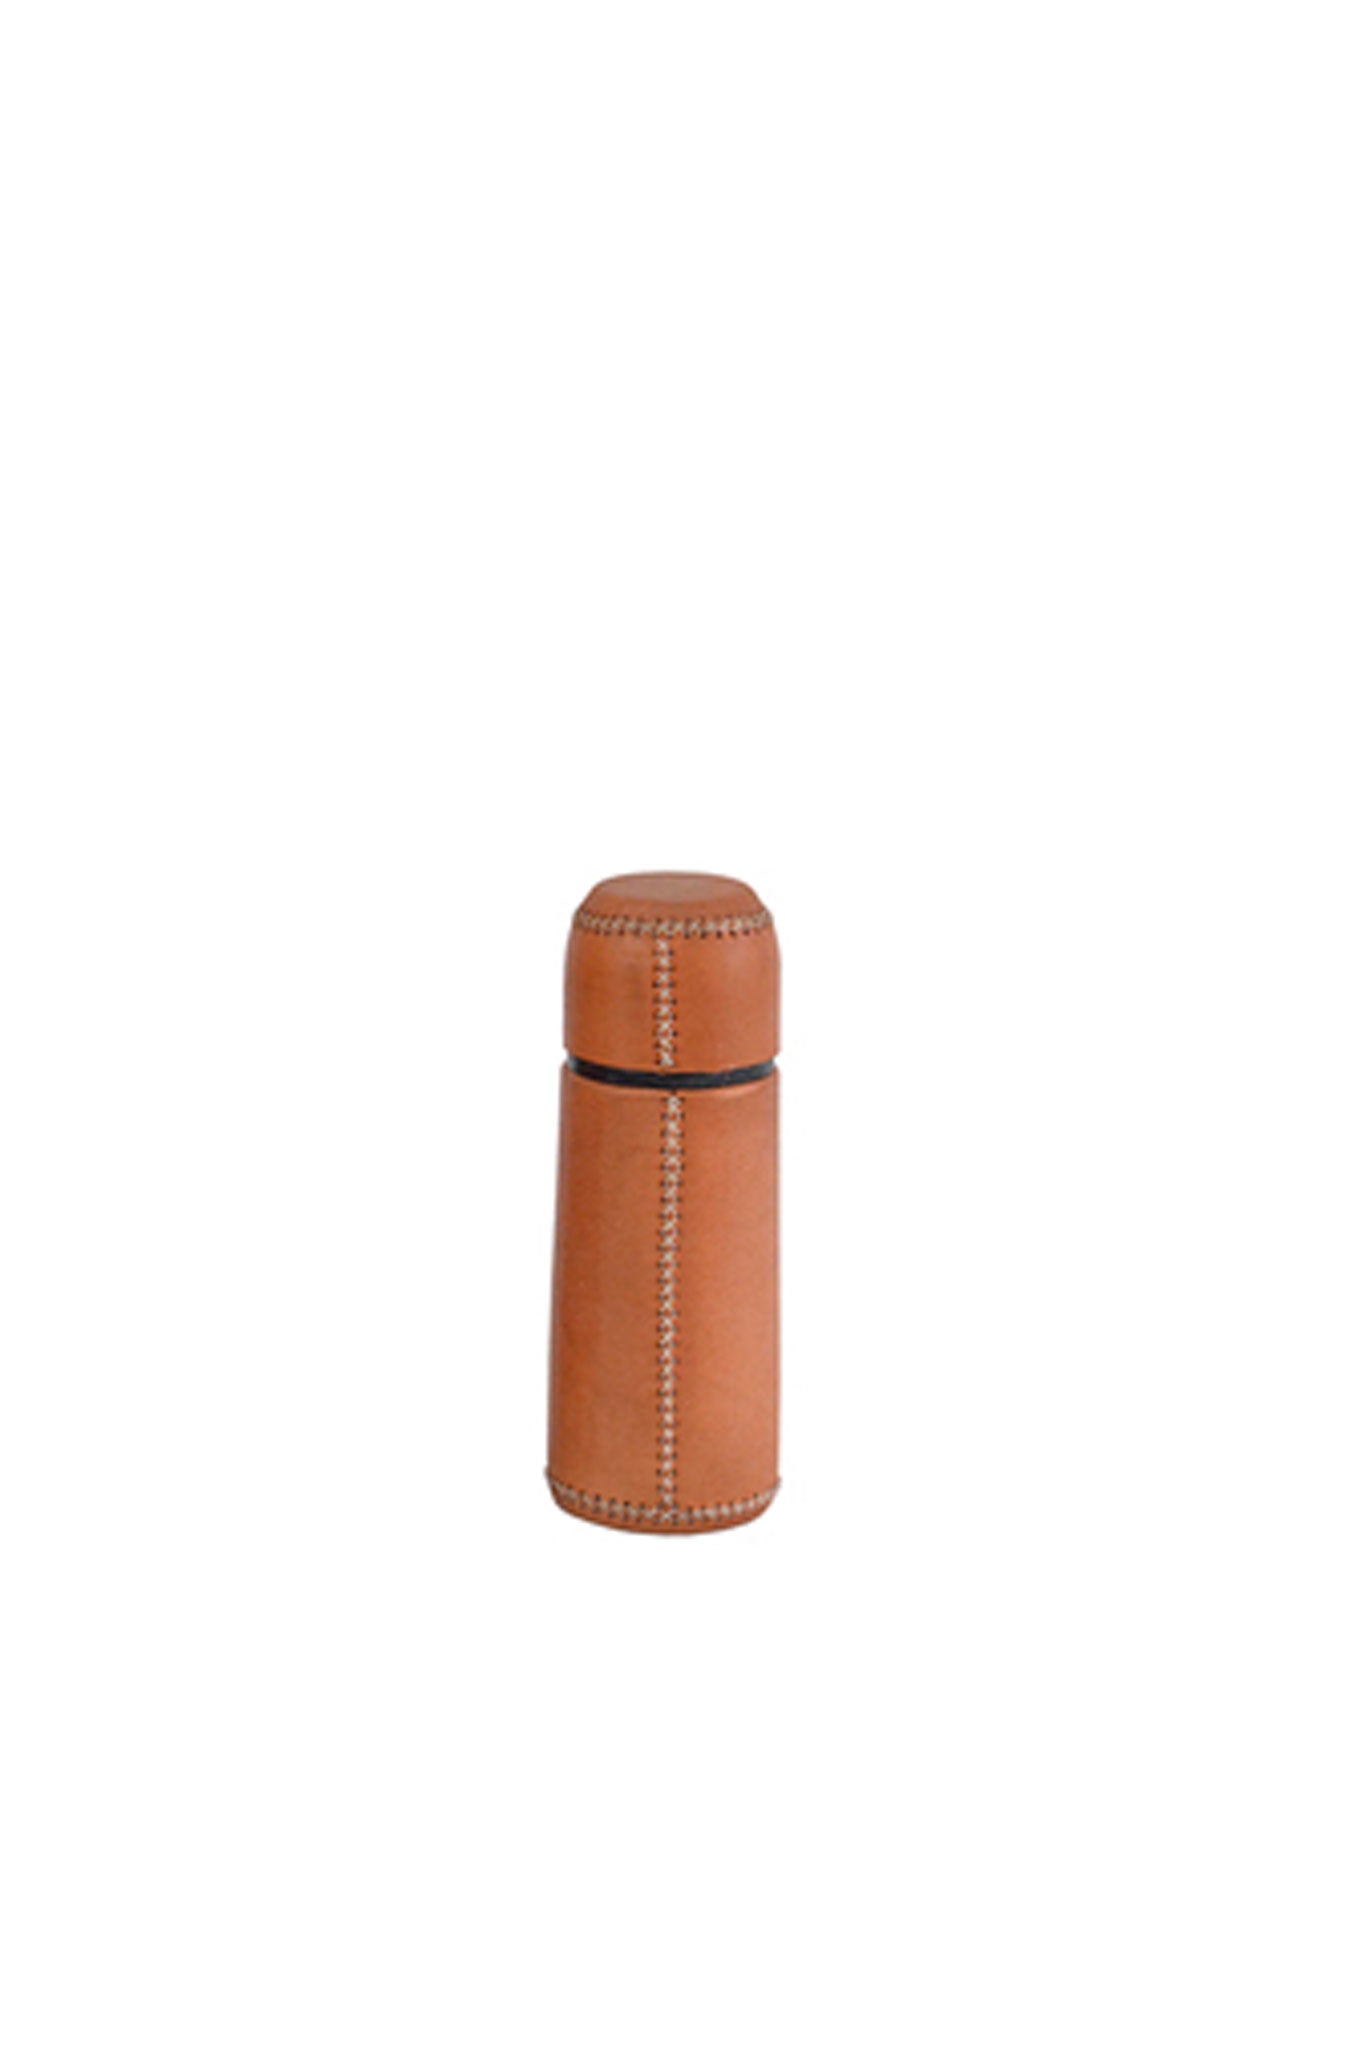 Natural Leather 0.35L Thermo Bottle